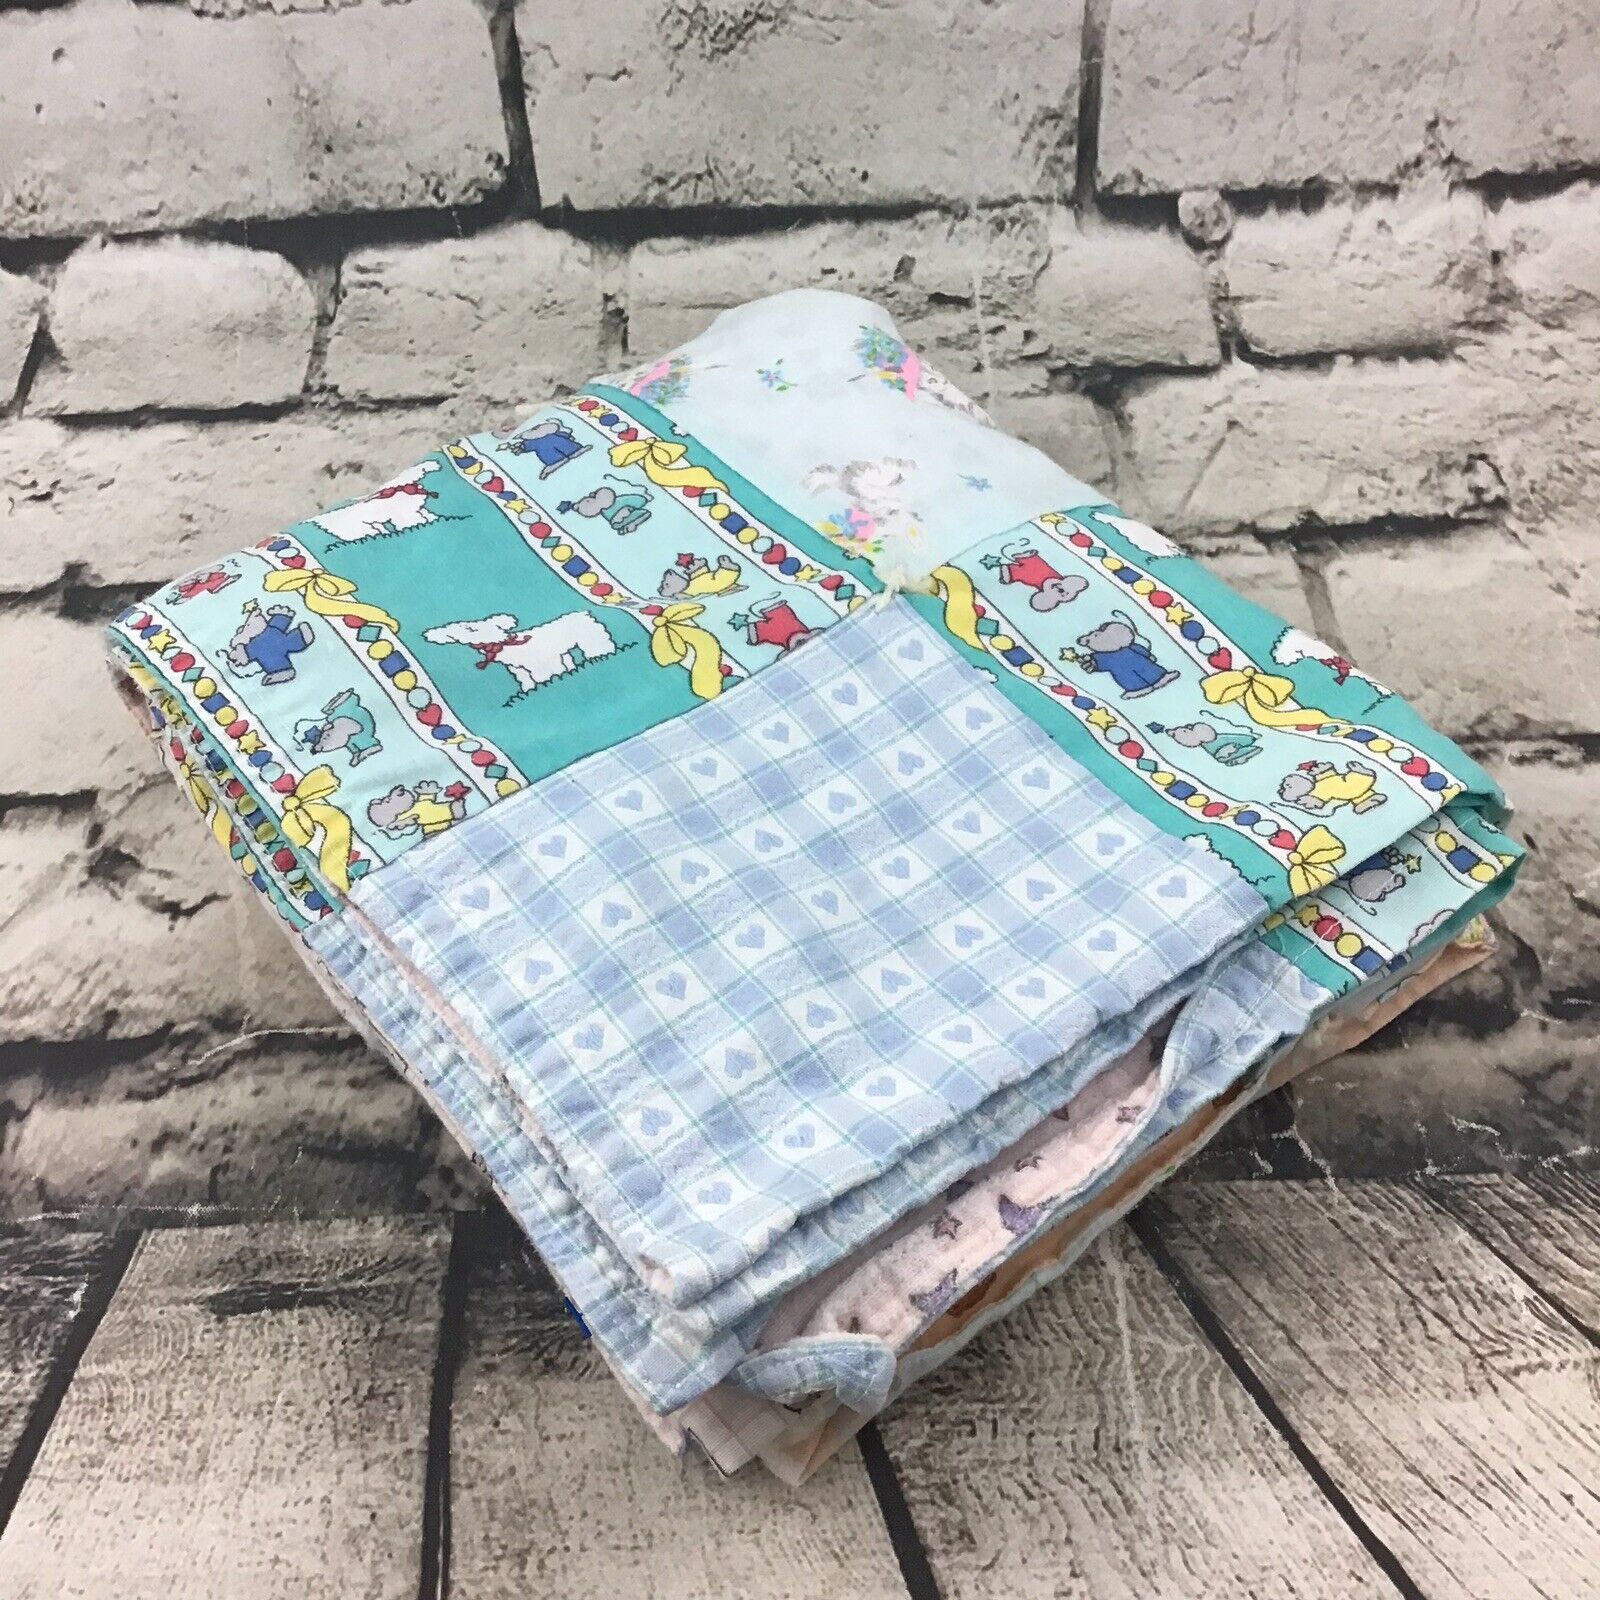 Handmade Childrens Patchwork Max 75% OFF Quilt Our shop most popular Kit Bunnys Springtime 34”X44”